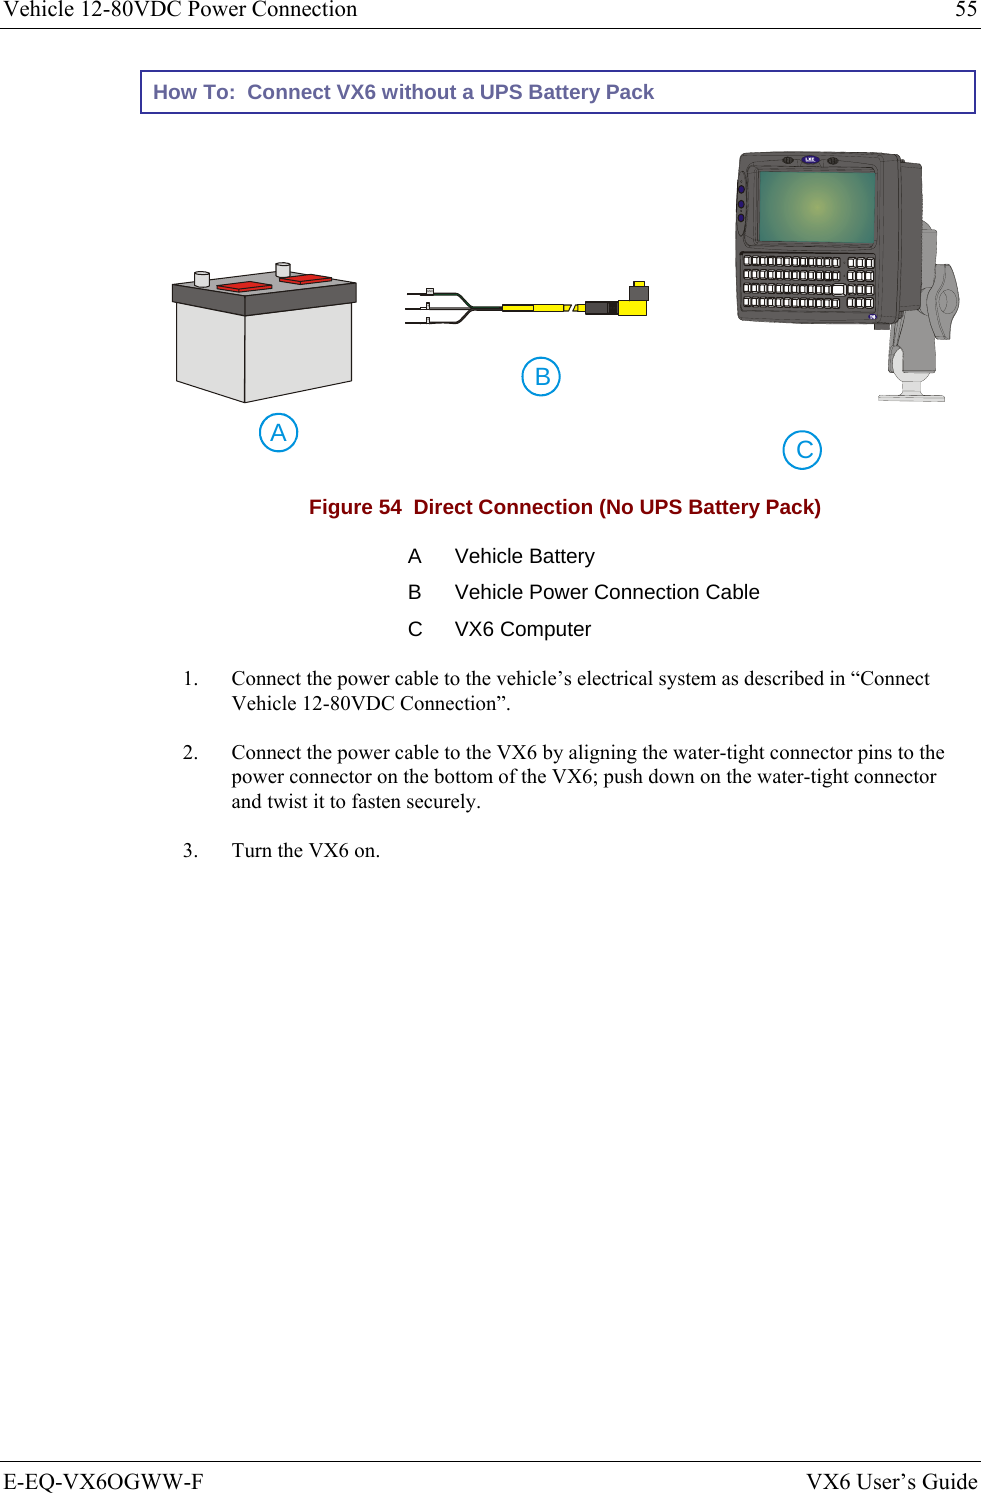 Vehicle 12-80VDC Power Connection  55 E-EQ-VX6OGWW-F  VX6 User’s Guide How To:  Connect VX6 without a UPS Battery Pack CAB  GND+- Figure 54  Direct Connection (No UPS Battery Pack) A Vehicle Battery B  Vehicle Power Connection Cable C VX6 Computer 1.  Connect the power cable to the vehicle’s electrical system as described in “Connect Vehicle 12-80VDC Connection”. 2.  Connect the power cable to the VX6 by aligning the water-tight connector pins to the power connector on the bottom of the VX6; push down on the water-tight connector and twist it to fasten securely. 3.  Turn the VX6 on. 